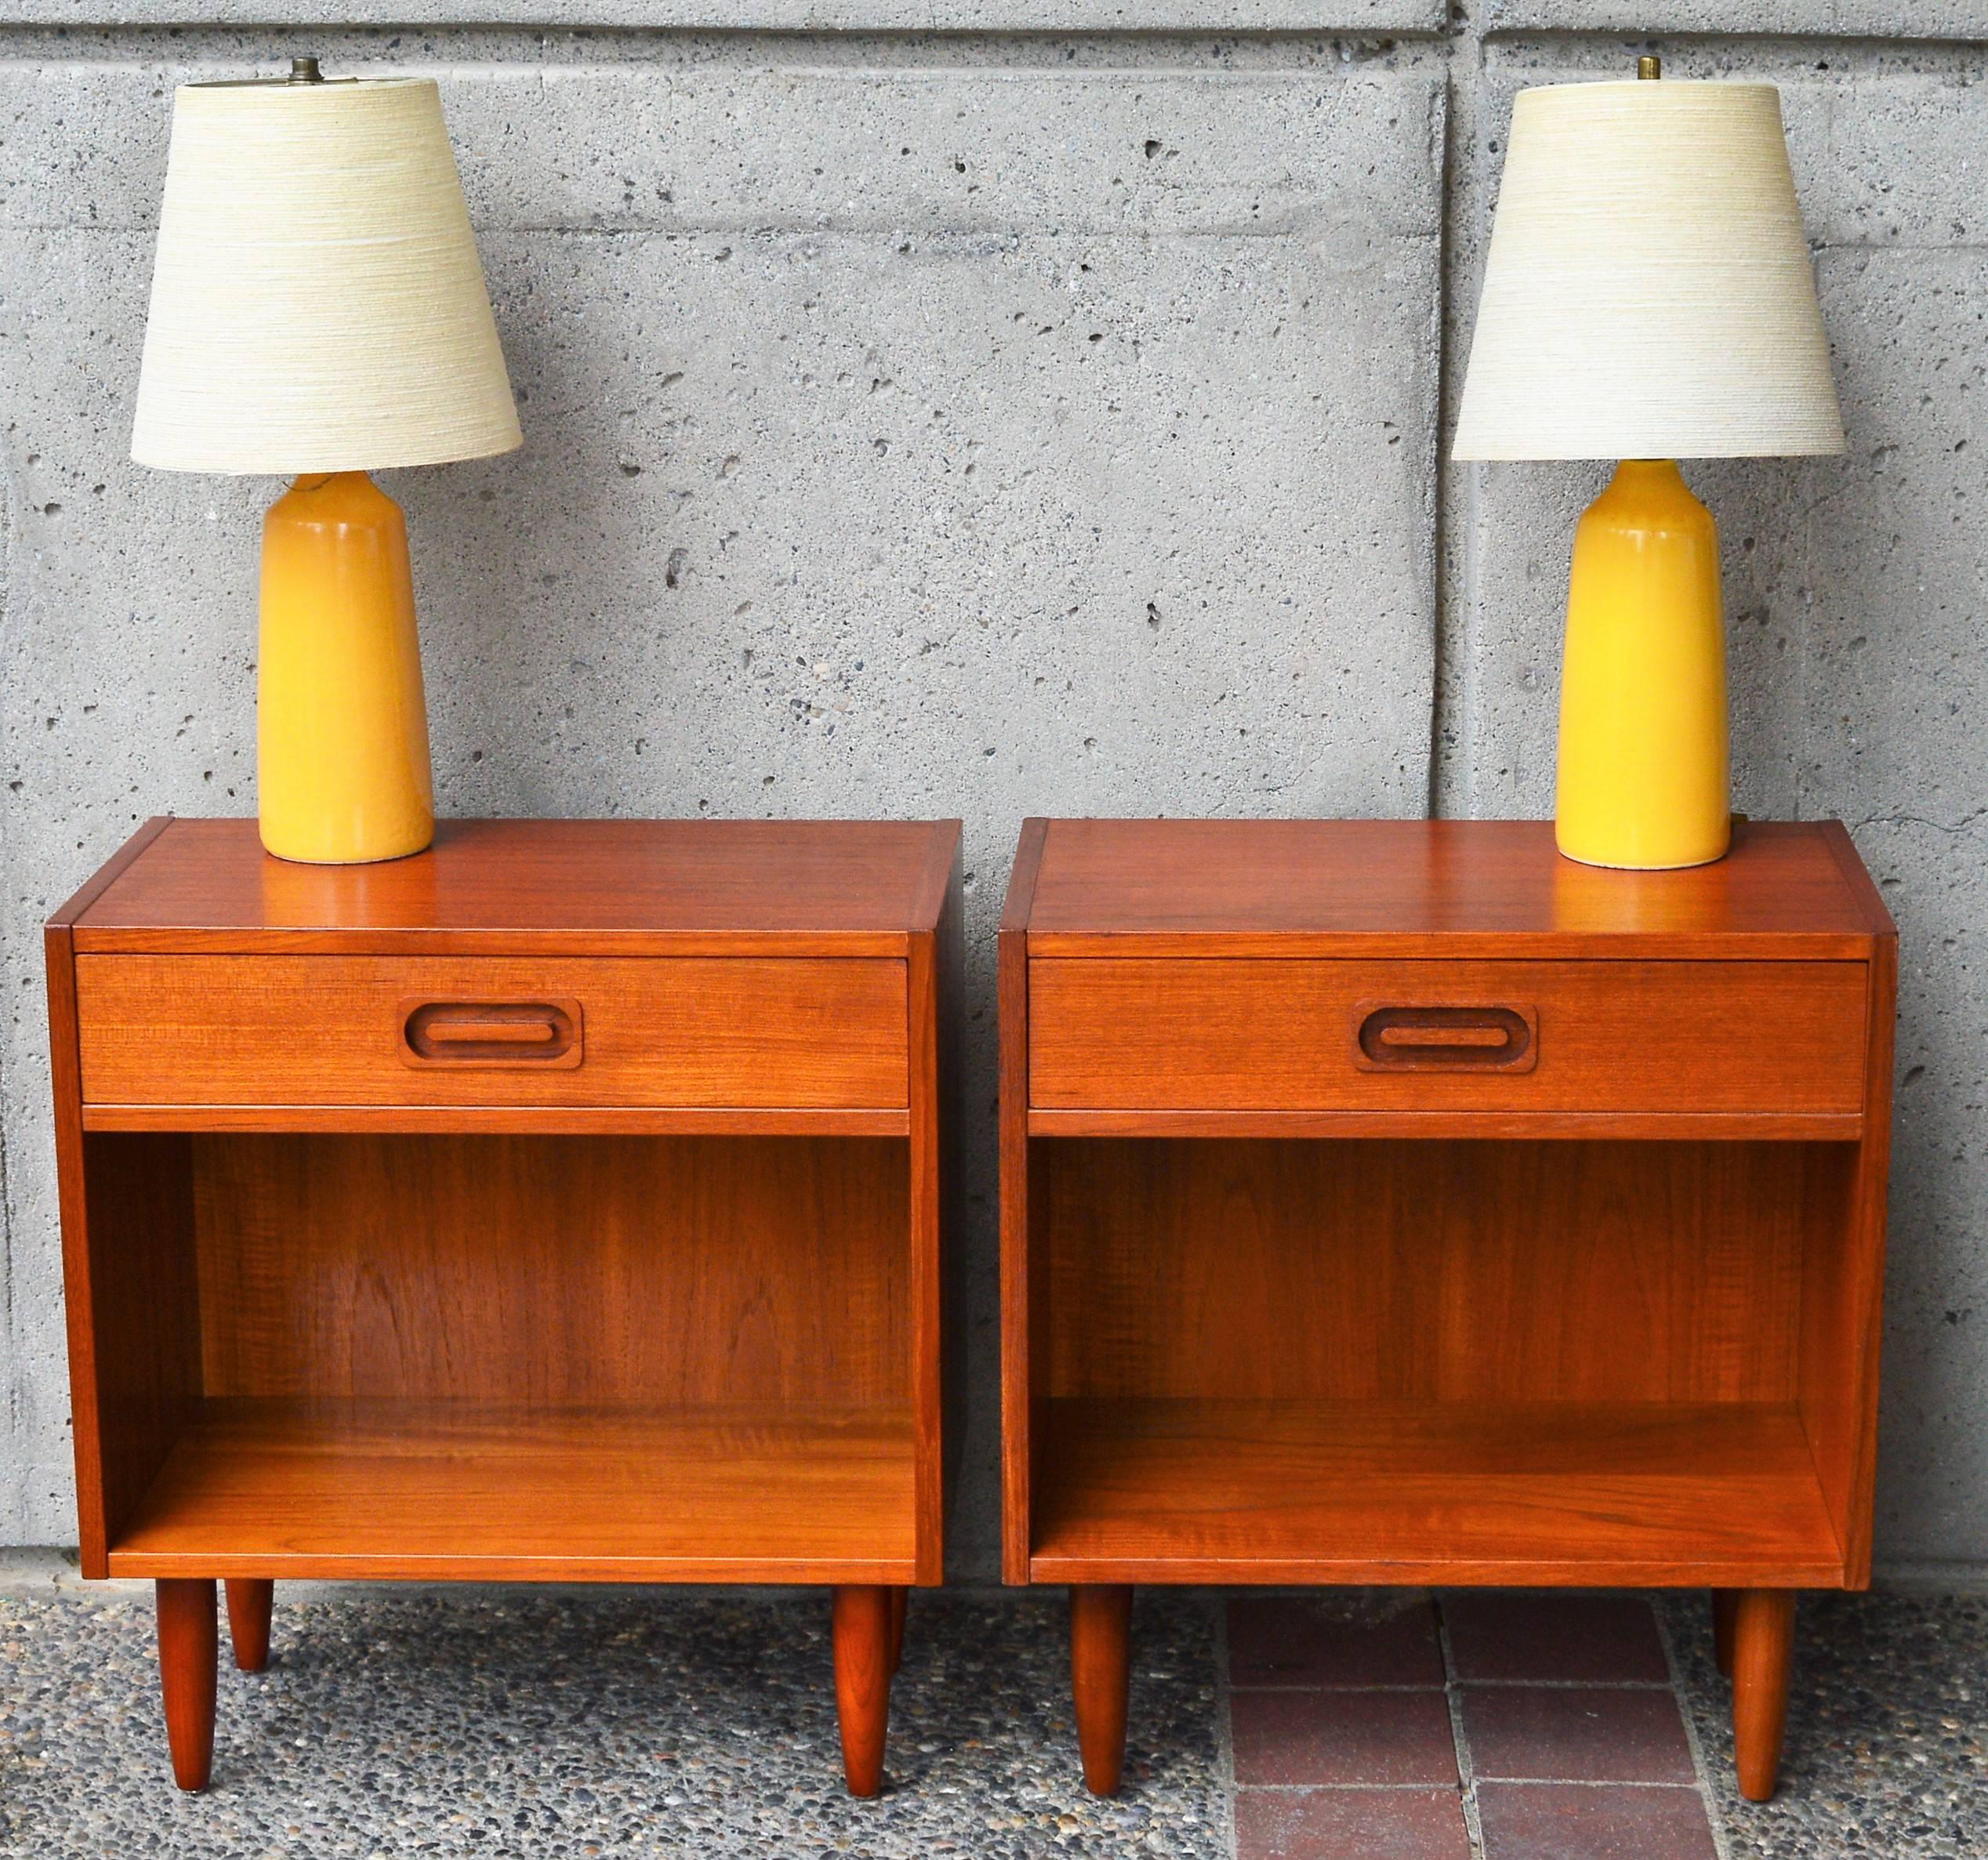 This fabulous pair of Danish modern teak bedside tables or nightstands feature a cubic design with one drawer with wood frame construction and dovetail joints as well as an open lower cabinet. Finished with tapering conical legs and sweet oval inset